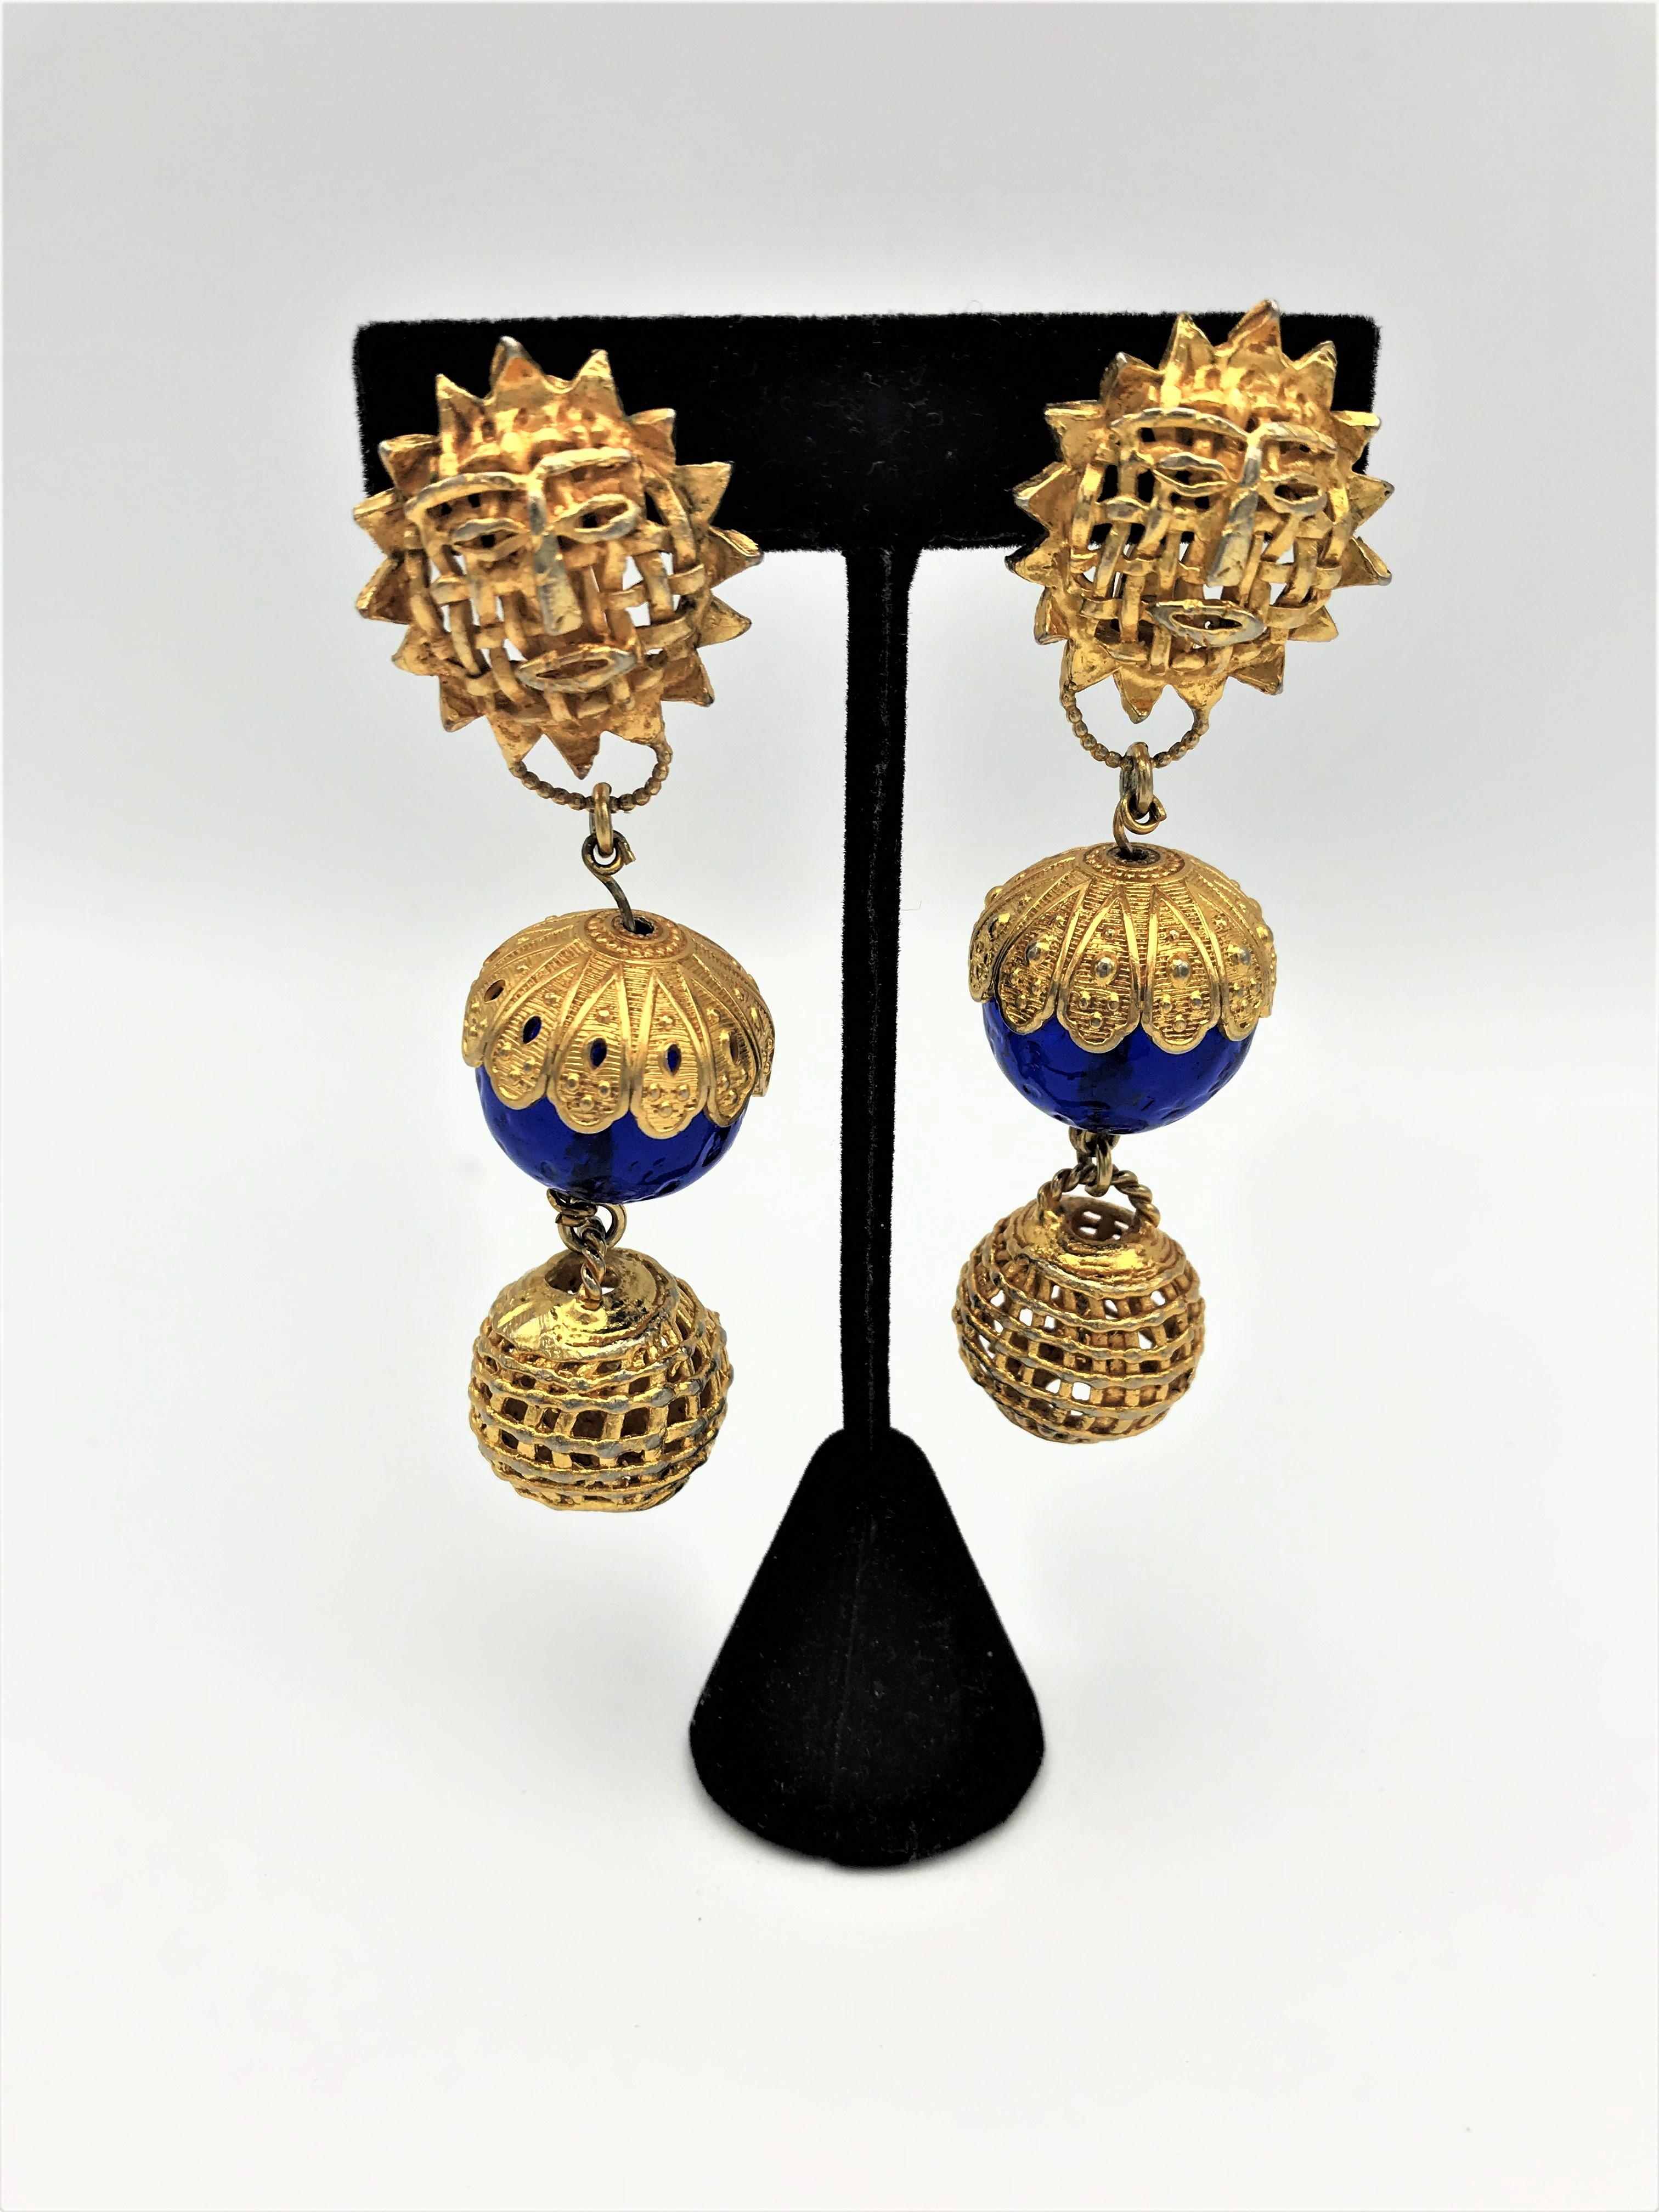 Clip-on earrings from Dominique Aurientis Paris. Consists of 3 balls. 
1. Ball sun with face/sun god,2. blue Gripoix ball with gold hood, last openwork ball. 
Measurement: Length 8 cm/3, Sun ball 2,4 cm/1